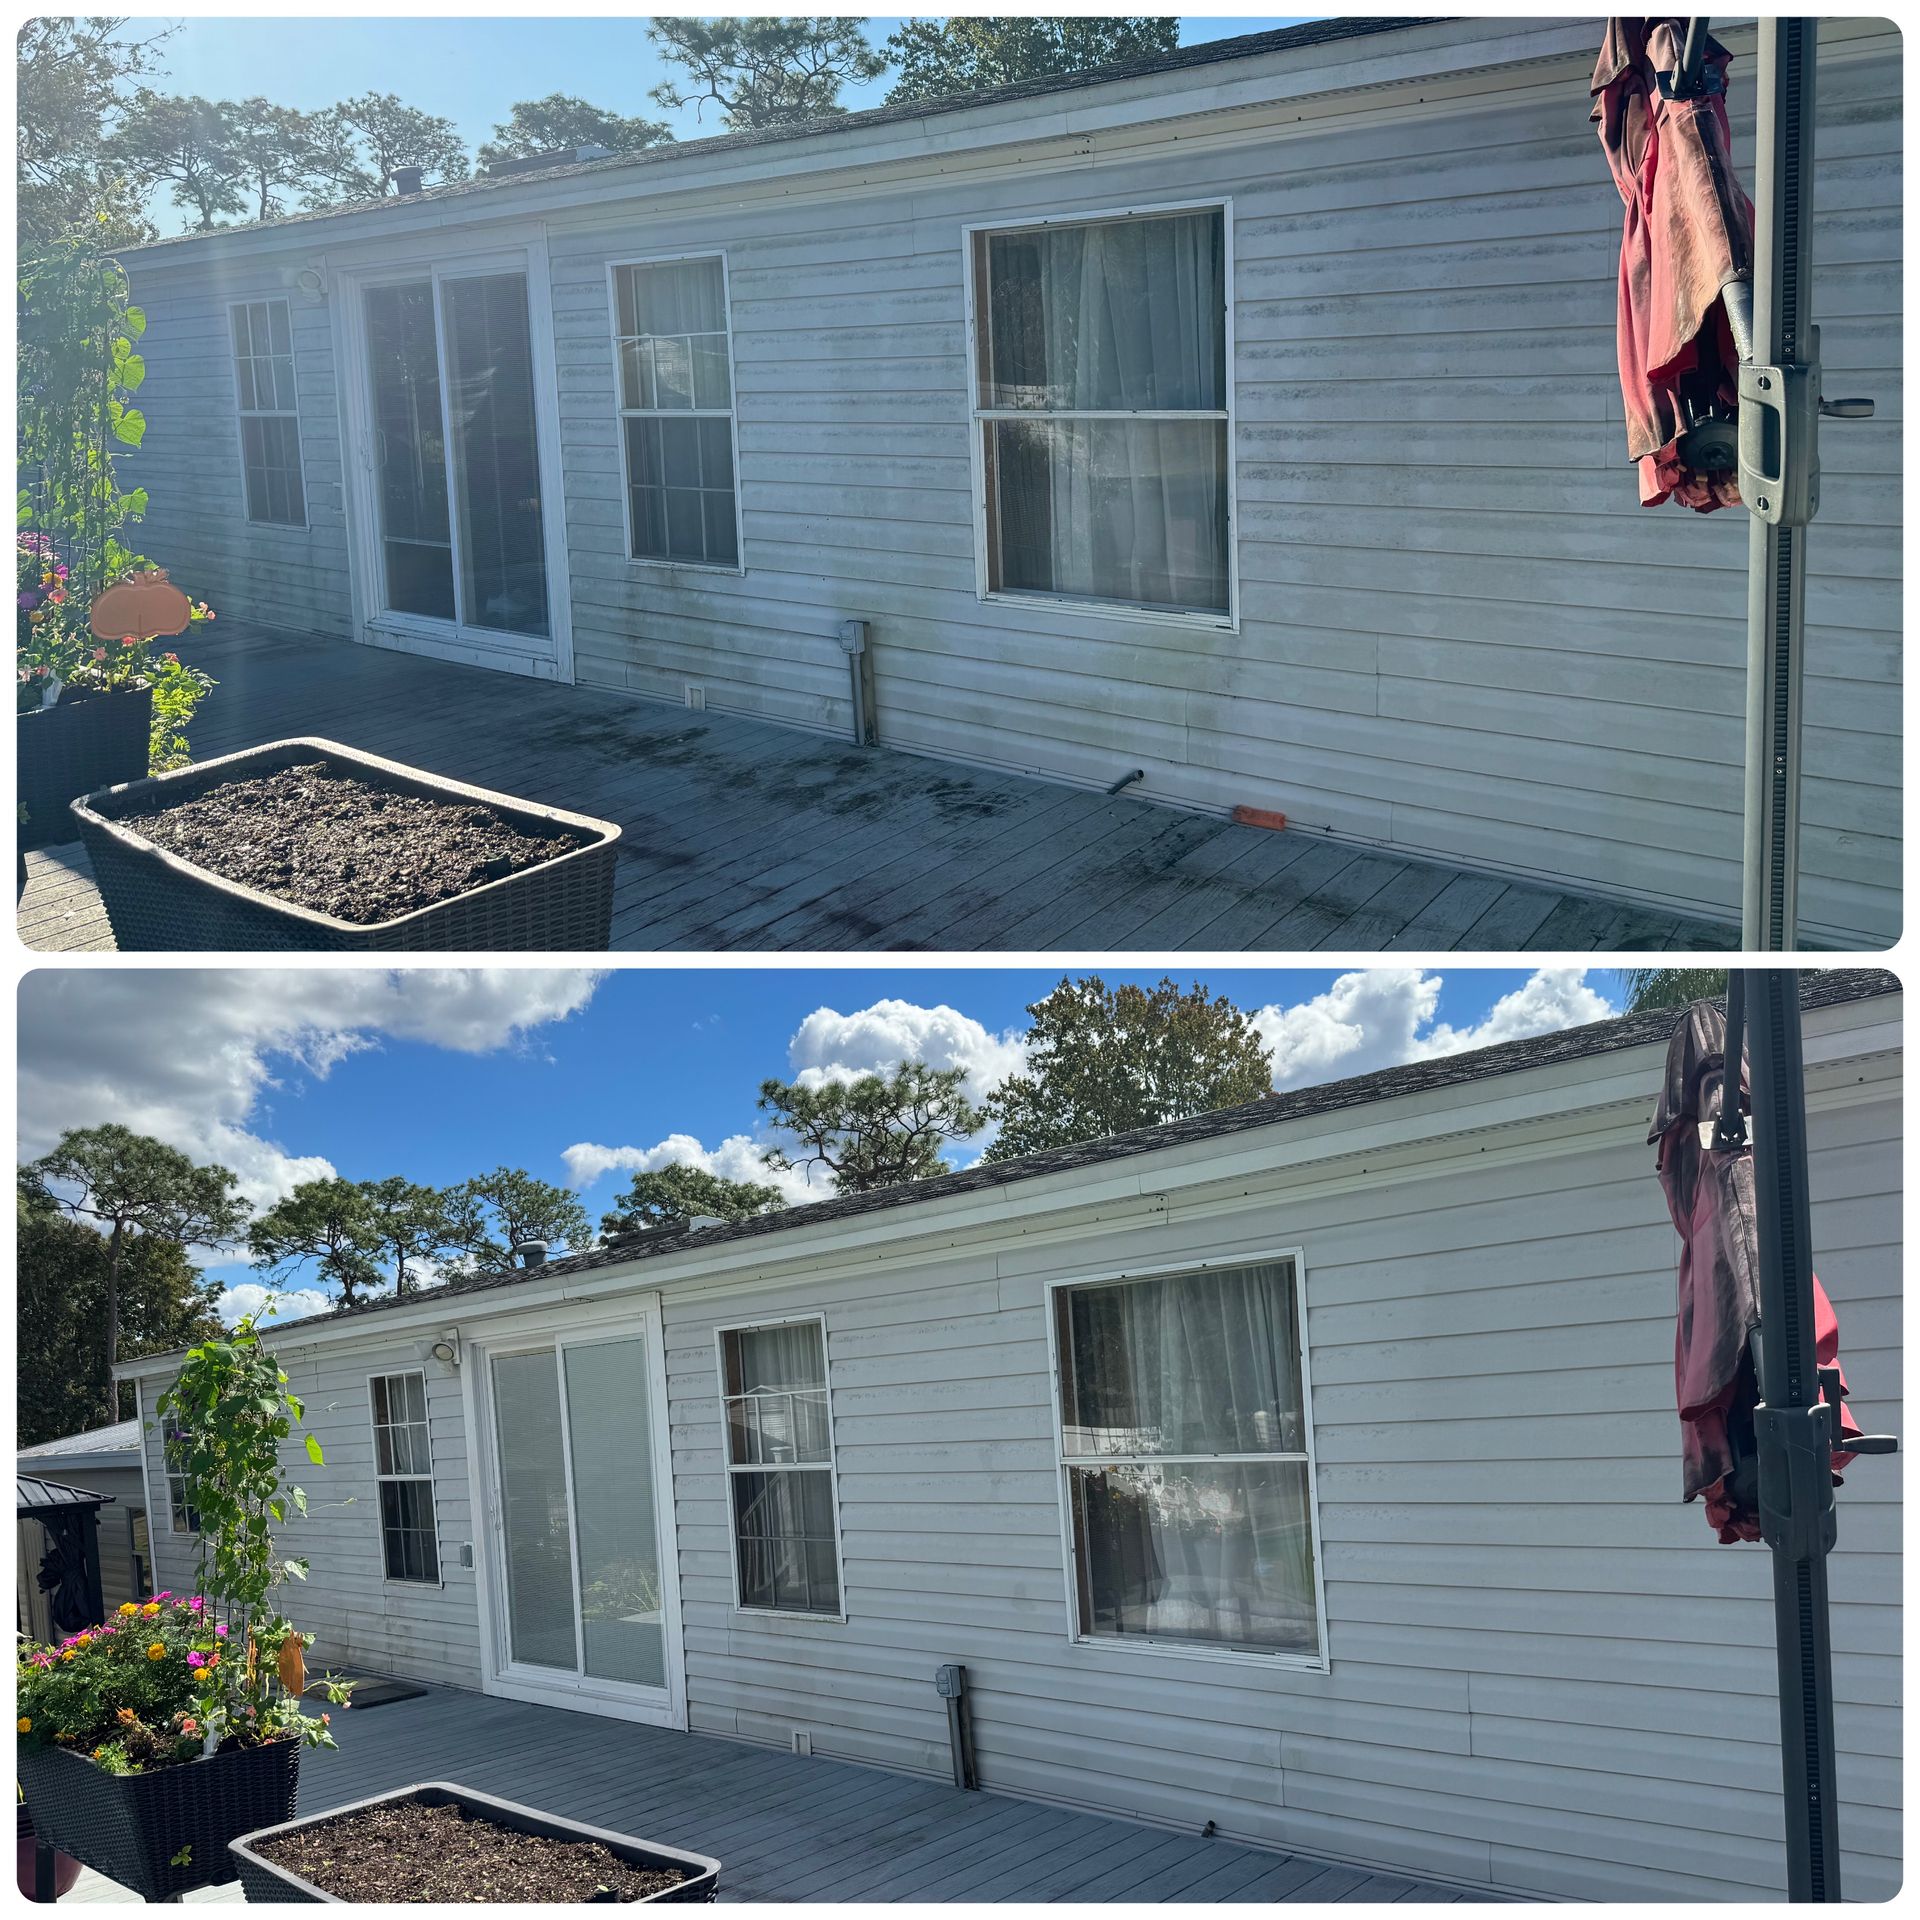 A before and after picture of a mobile home.